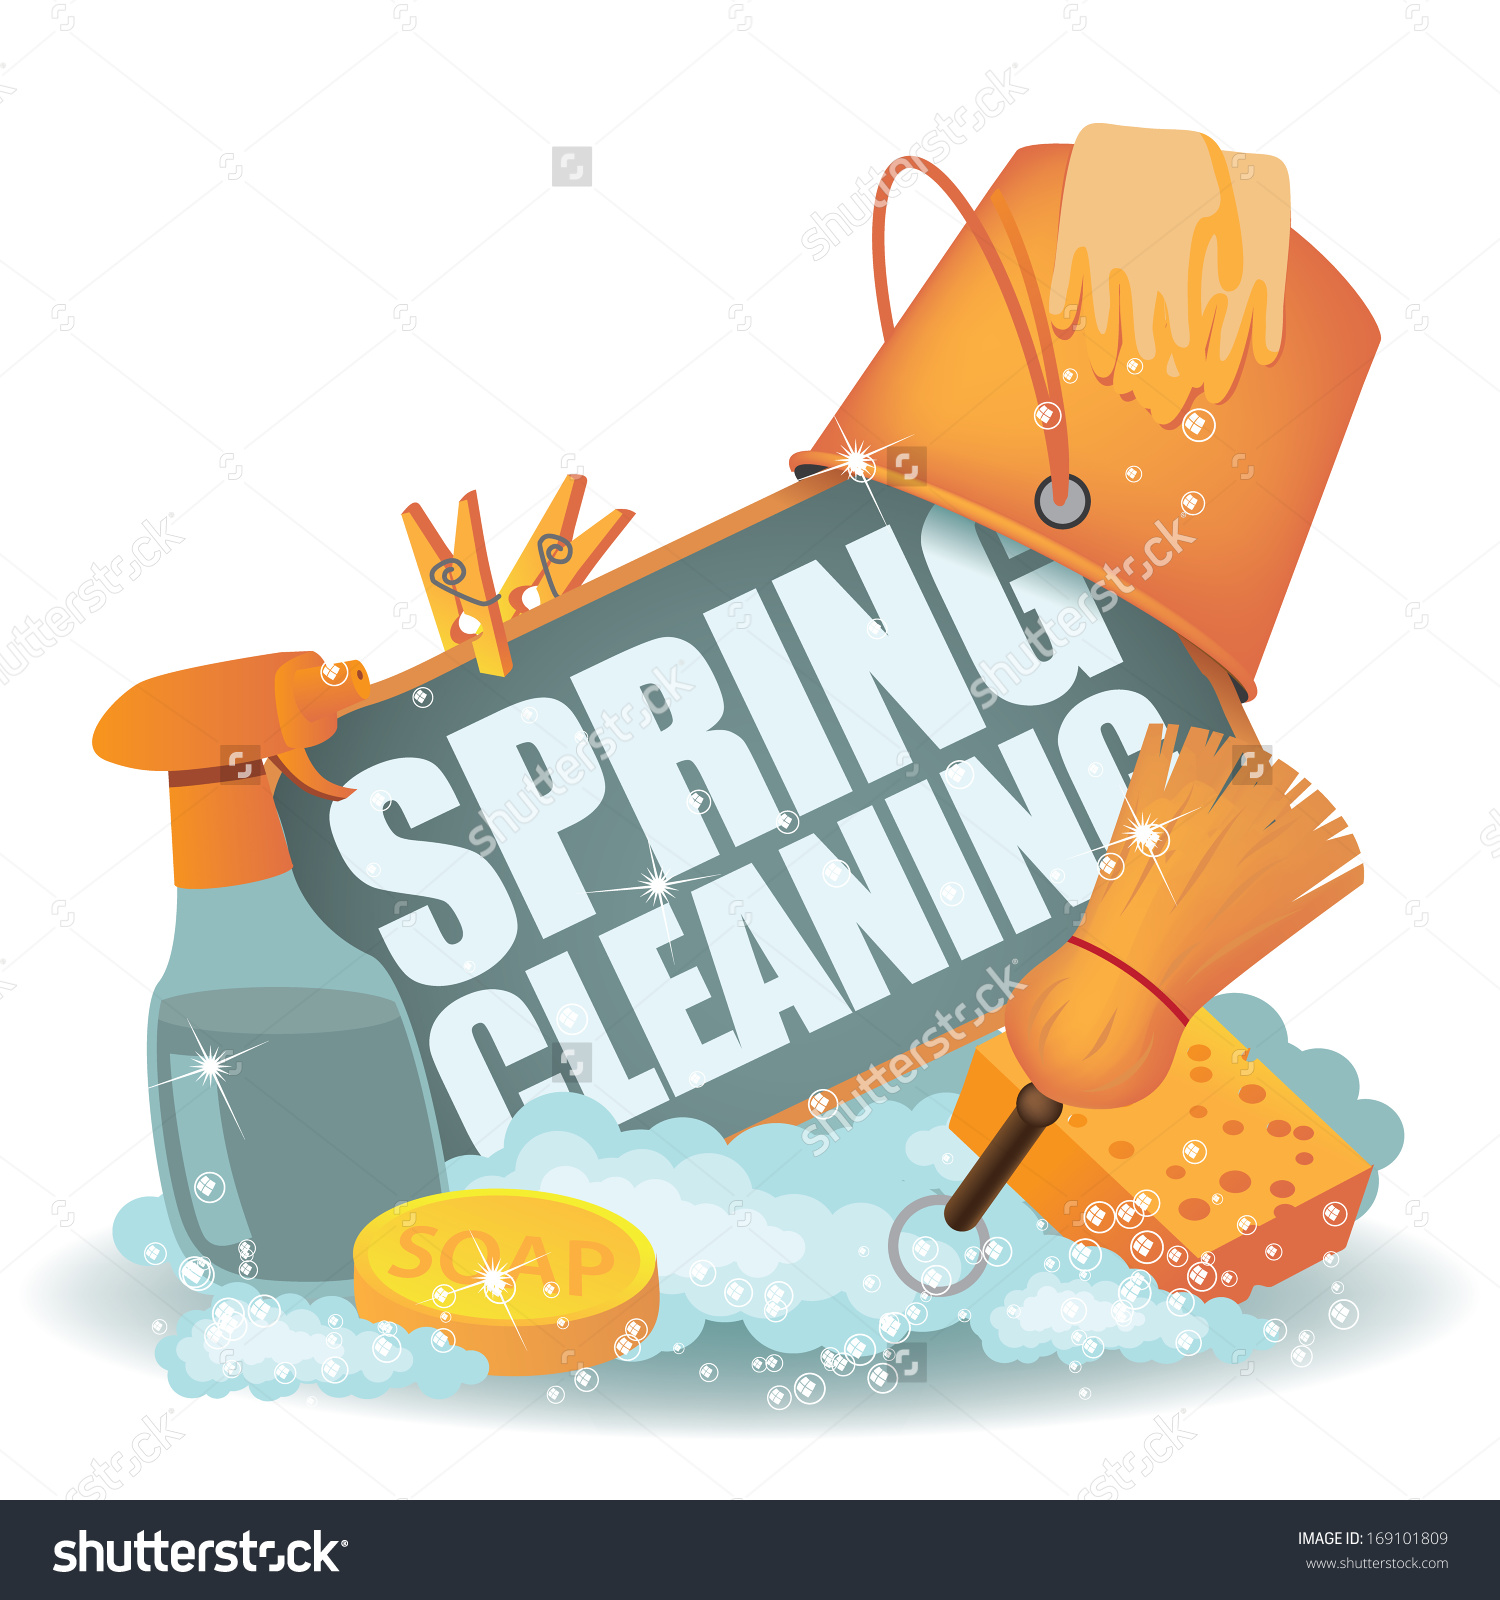 Clean Up Clipart